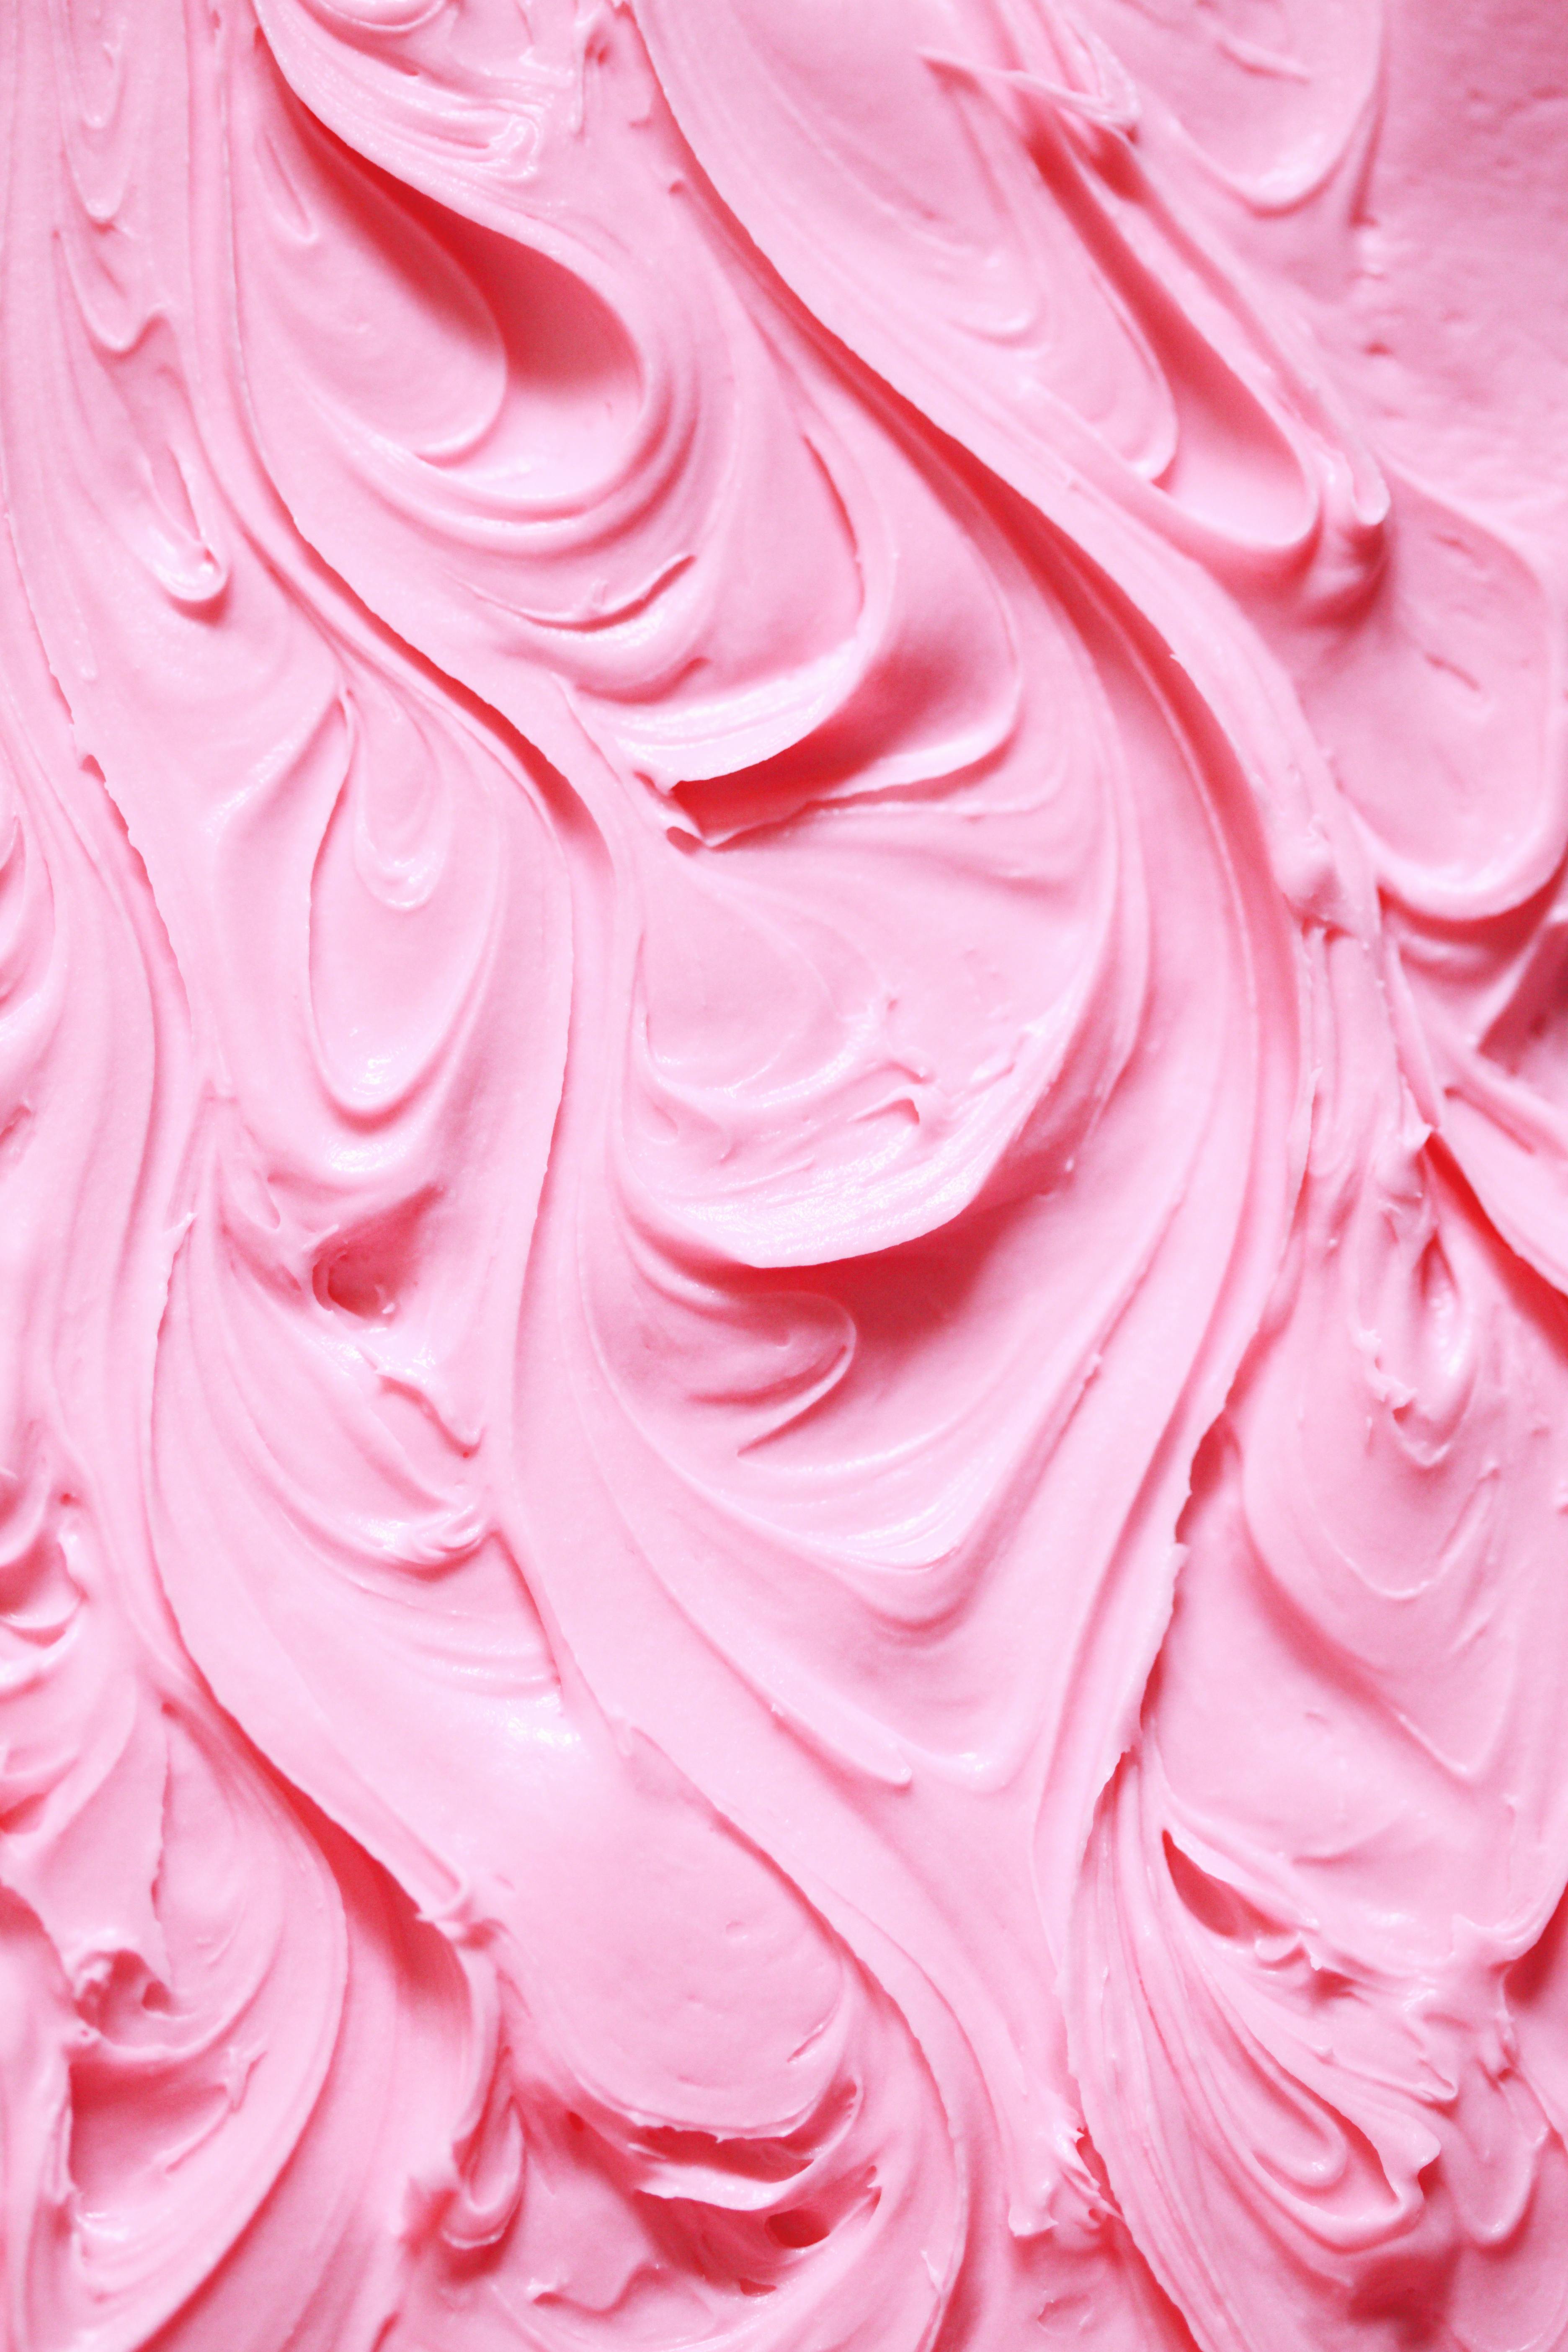 44+ Pink Wallpapers: HD, 4K, 5K for PC and Mobile | Download free images  for iPhone, Android